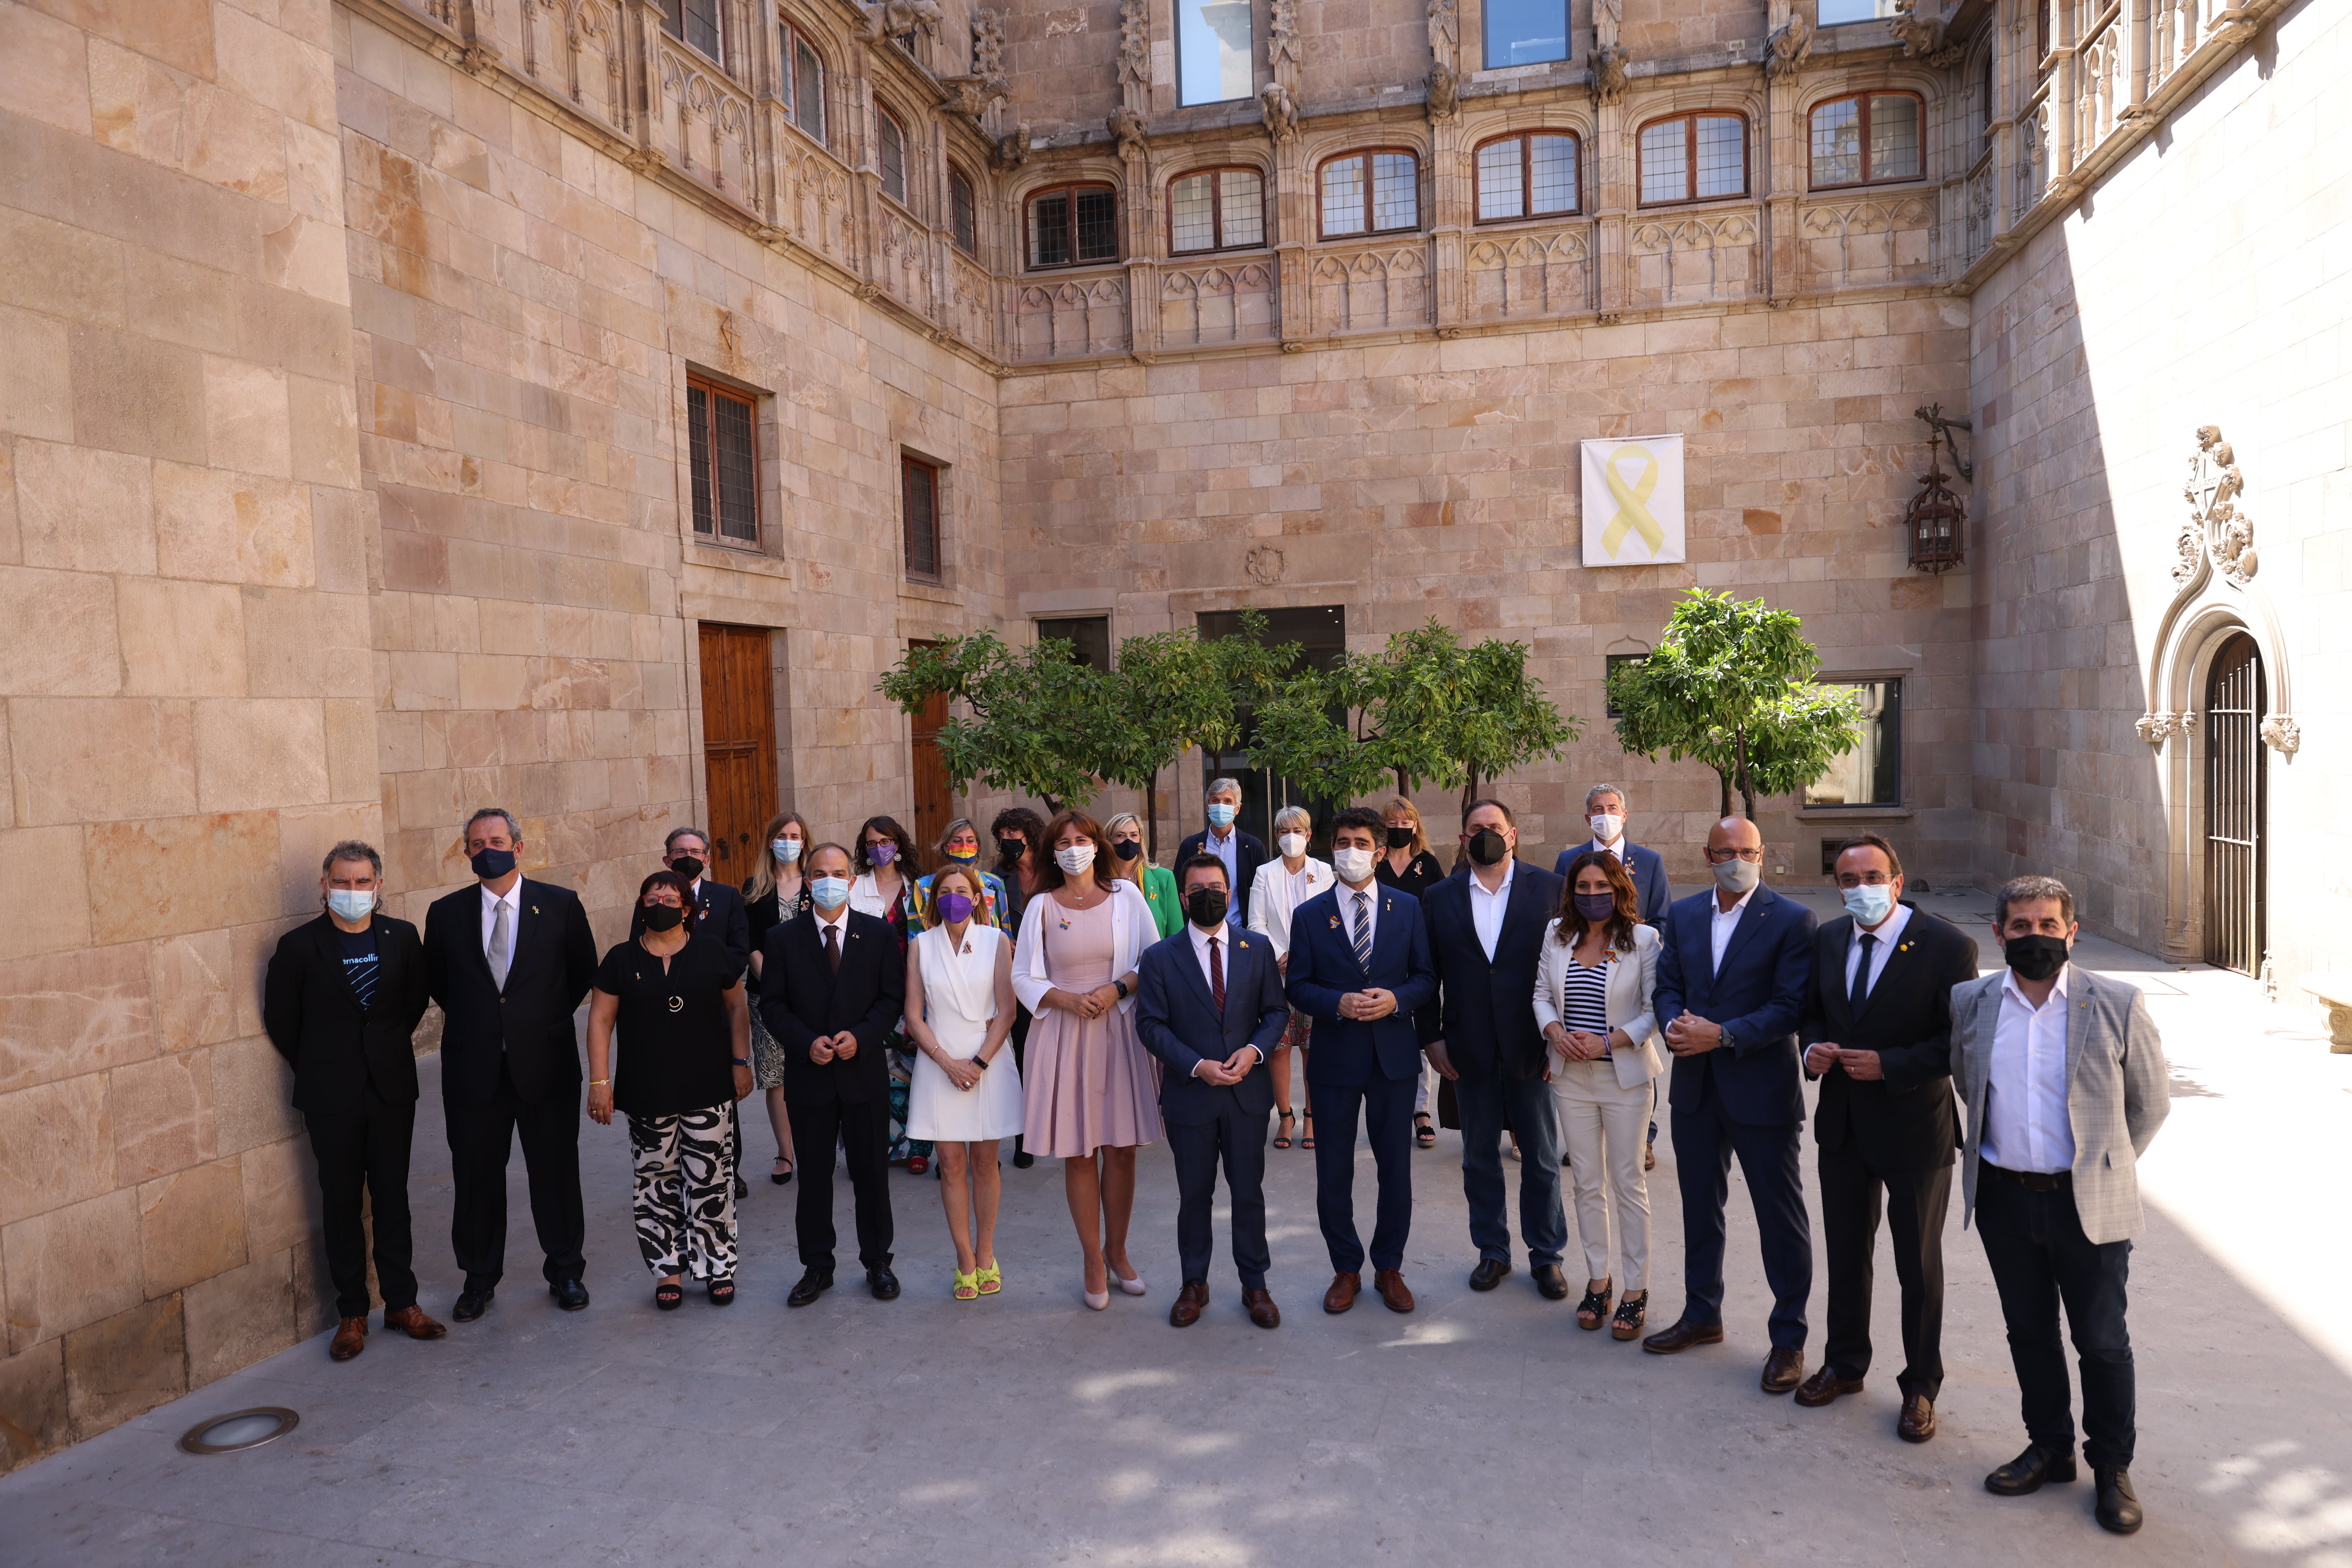 Catalan government pays homage to the political prisoners at Generalitat palace